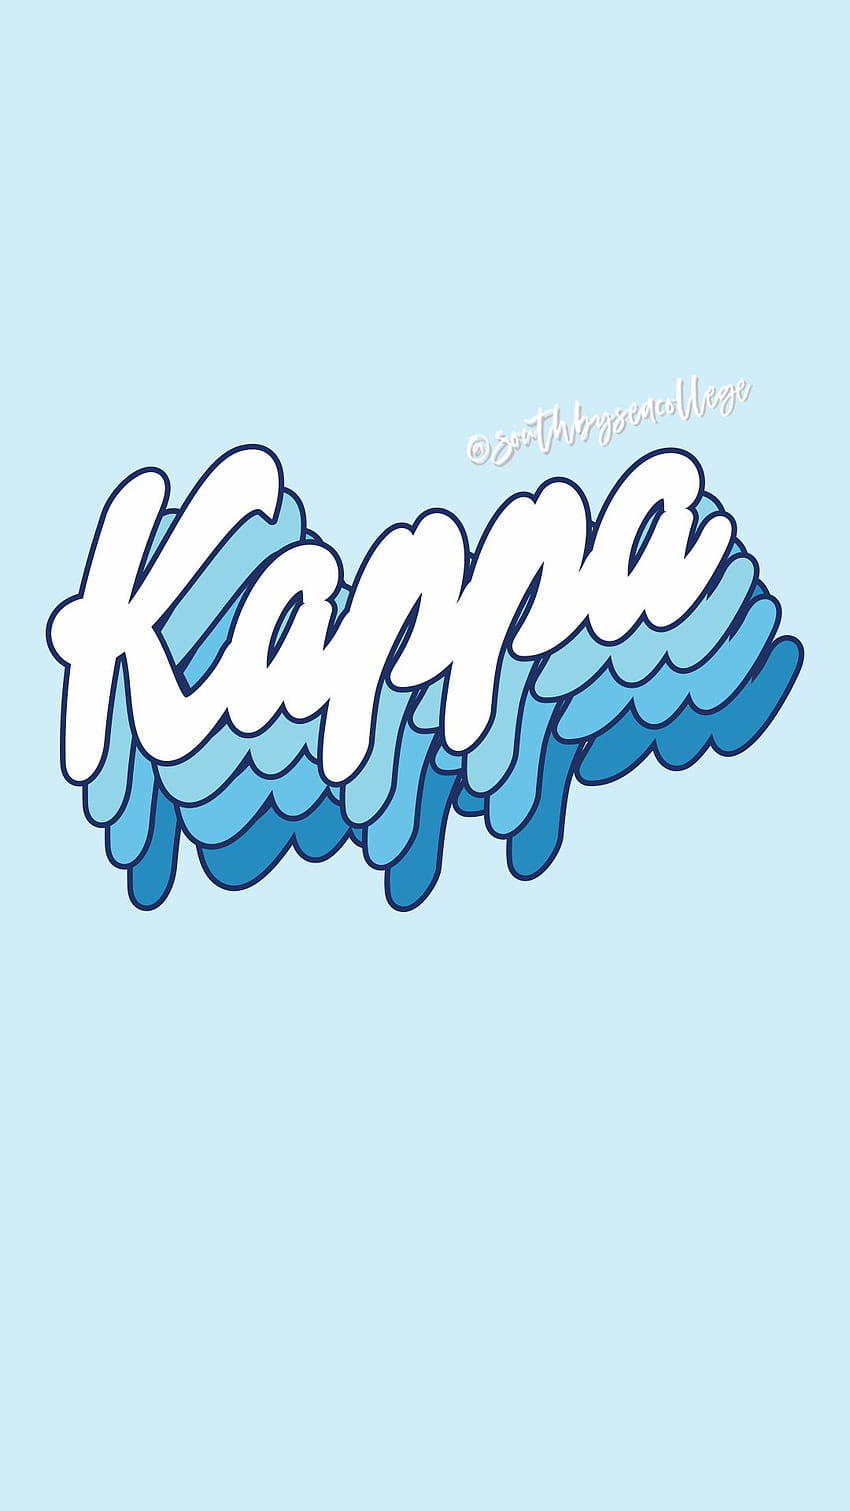 7 Wallpapers by Kappa